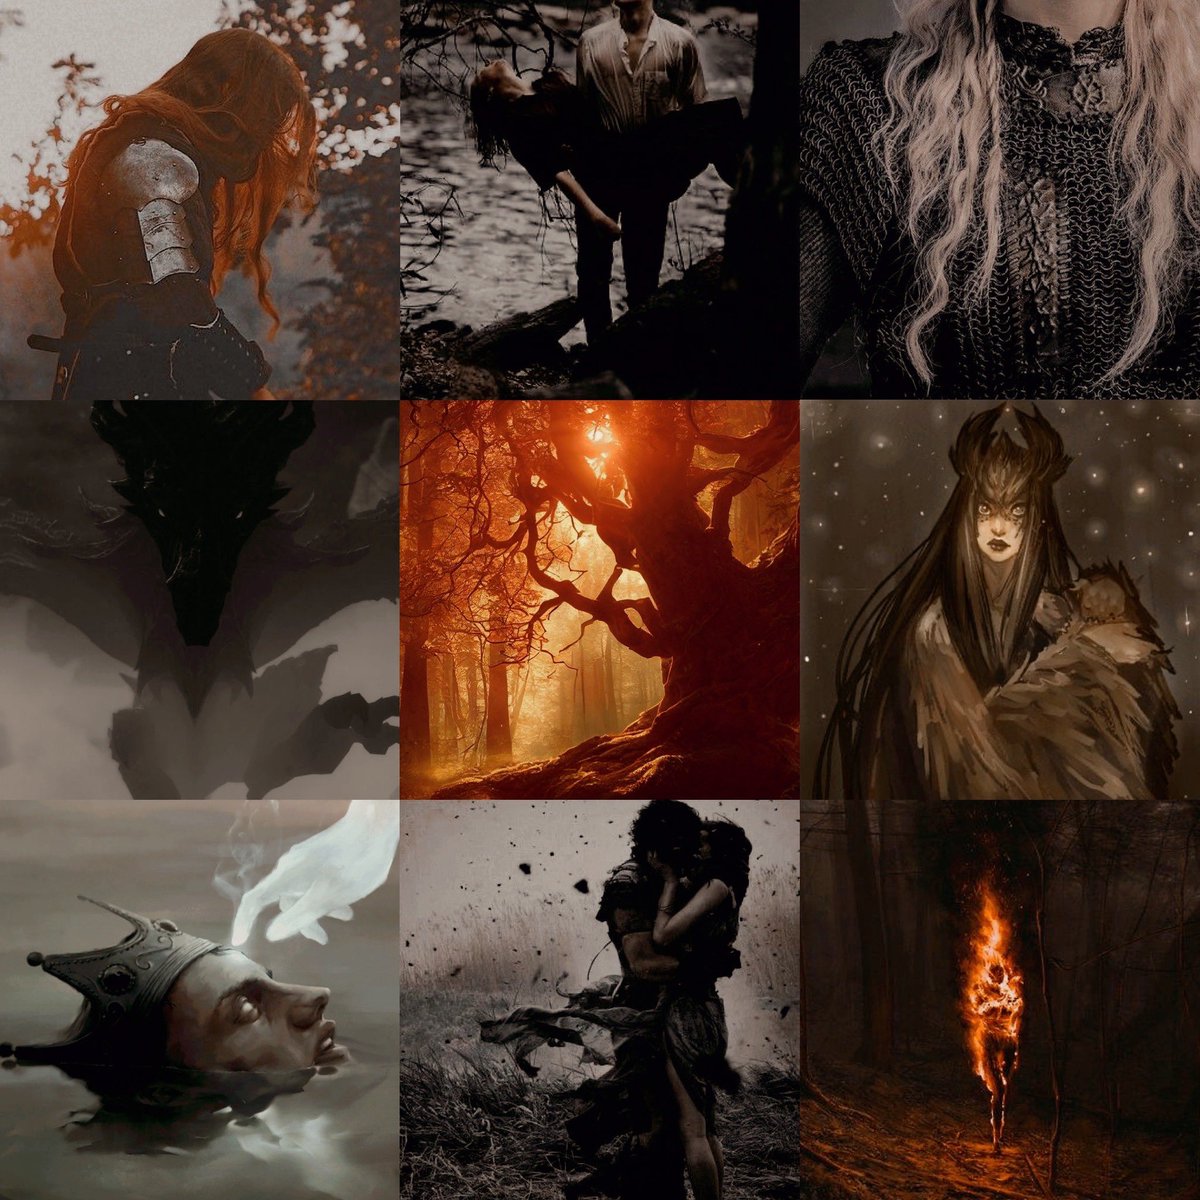 I’m just over here making mood boards for my third high fantasy book and vibing to the soundtrack that I almost have perfected for it 😌 #fantasywriter #queerfantasy